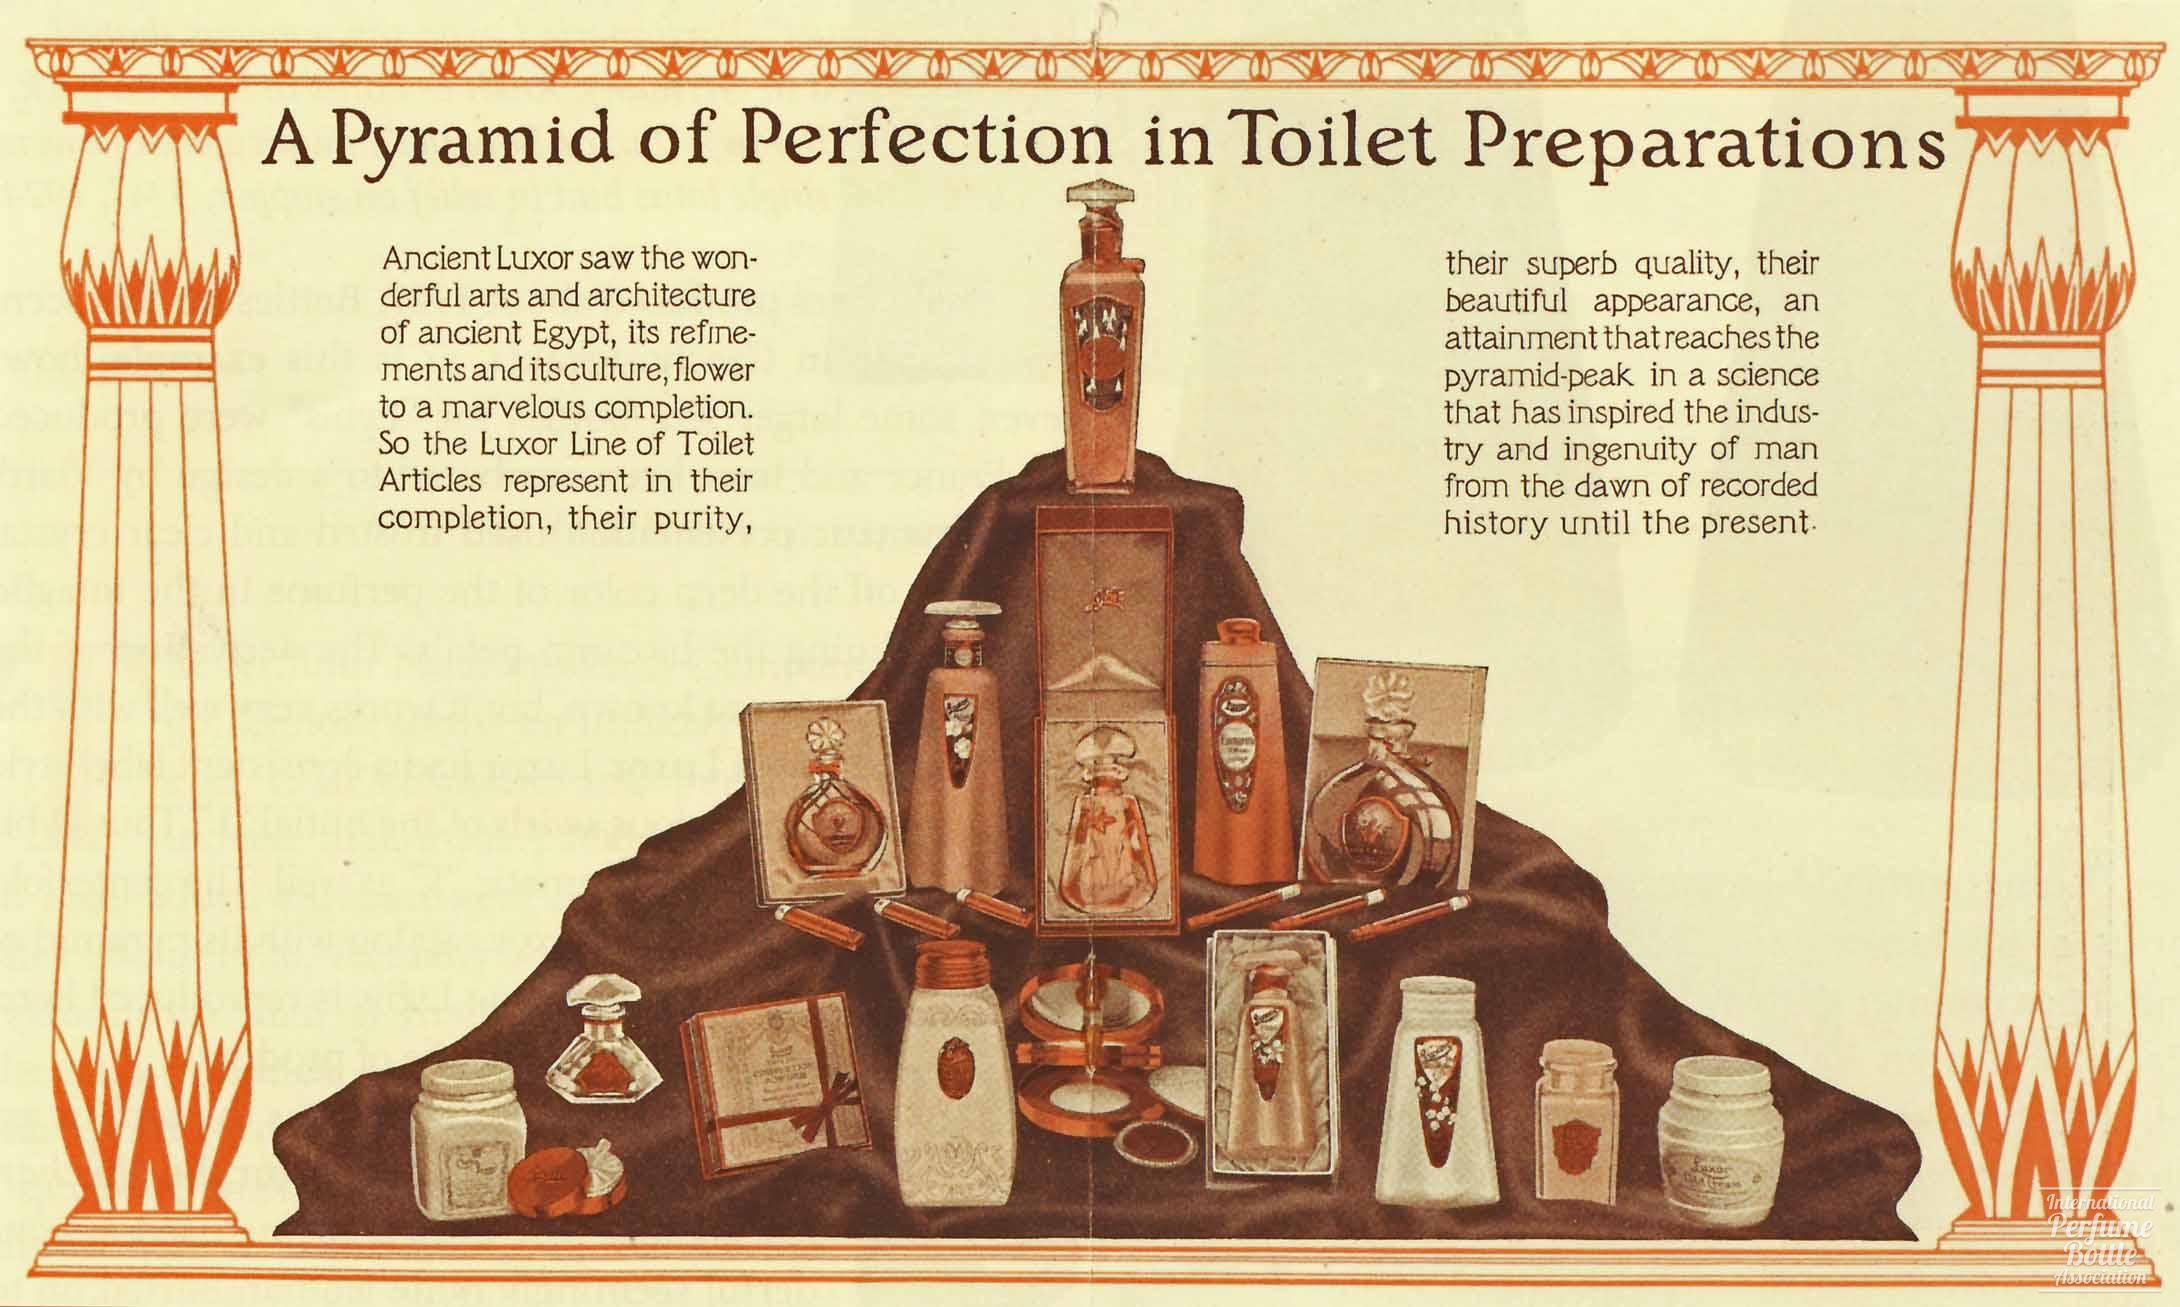 "Pyramid of Perfection" Catalog Centerfold by Luxor - 1927